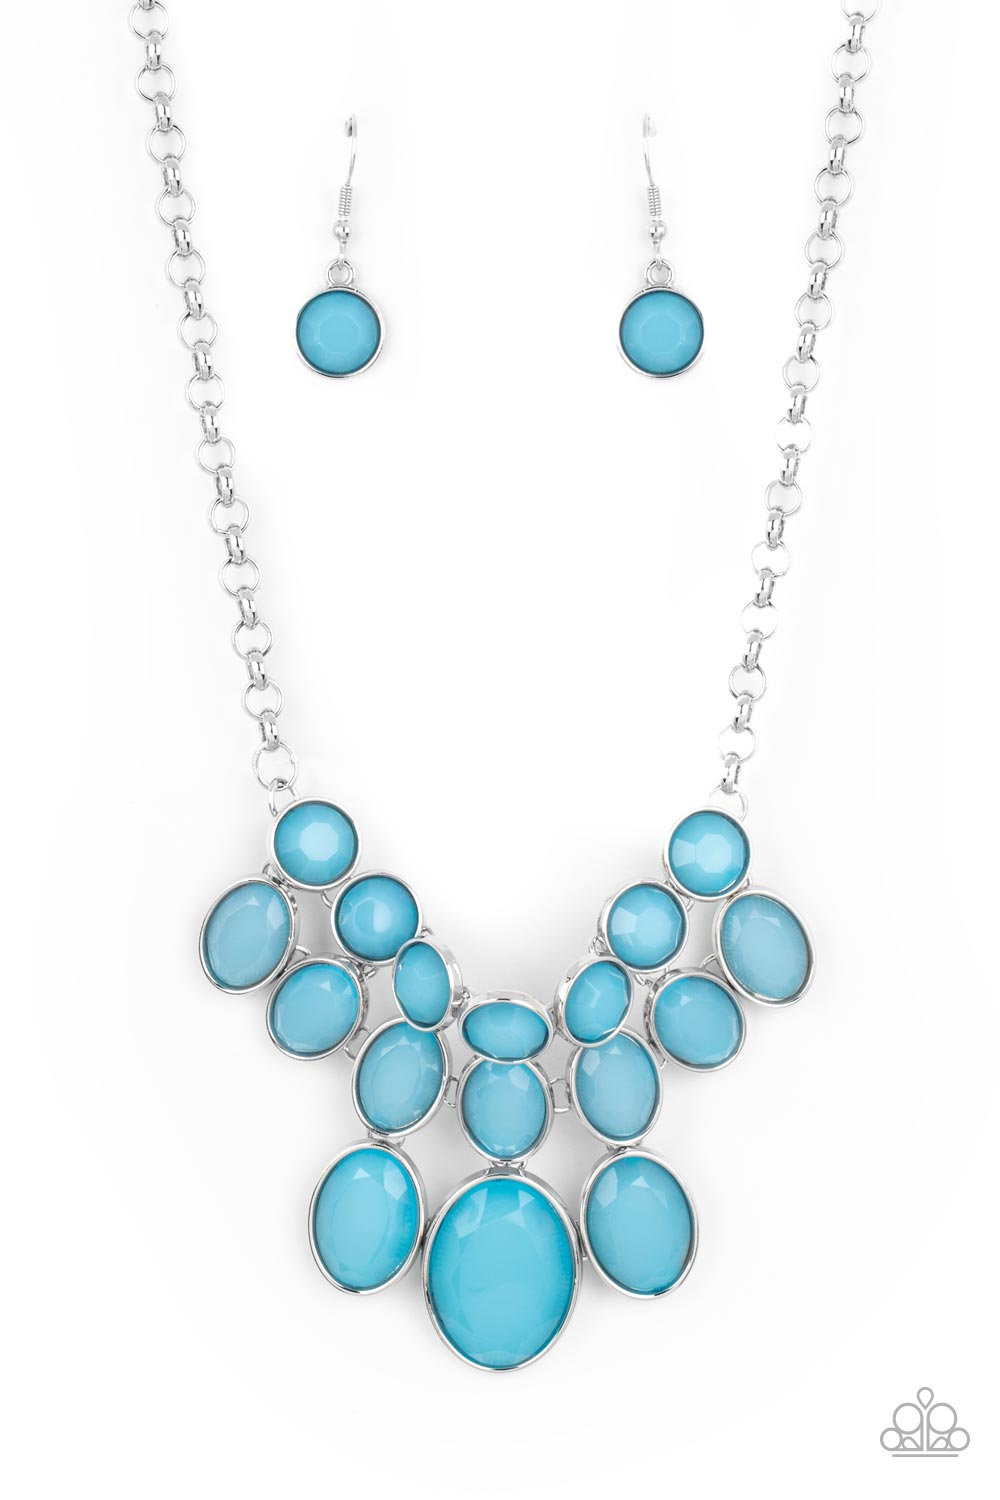 Necklace - Delectable Daydream - Blue